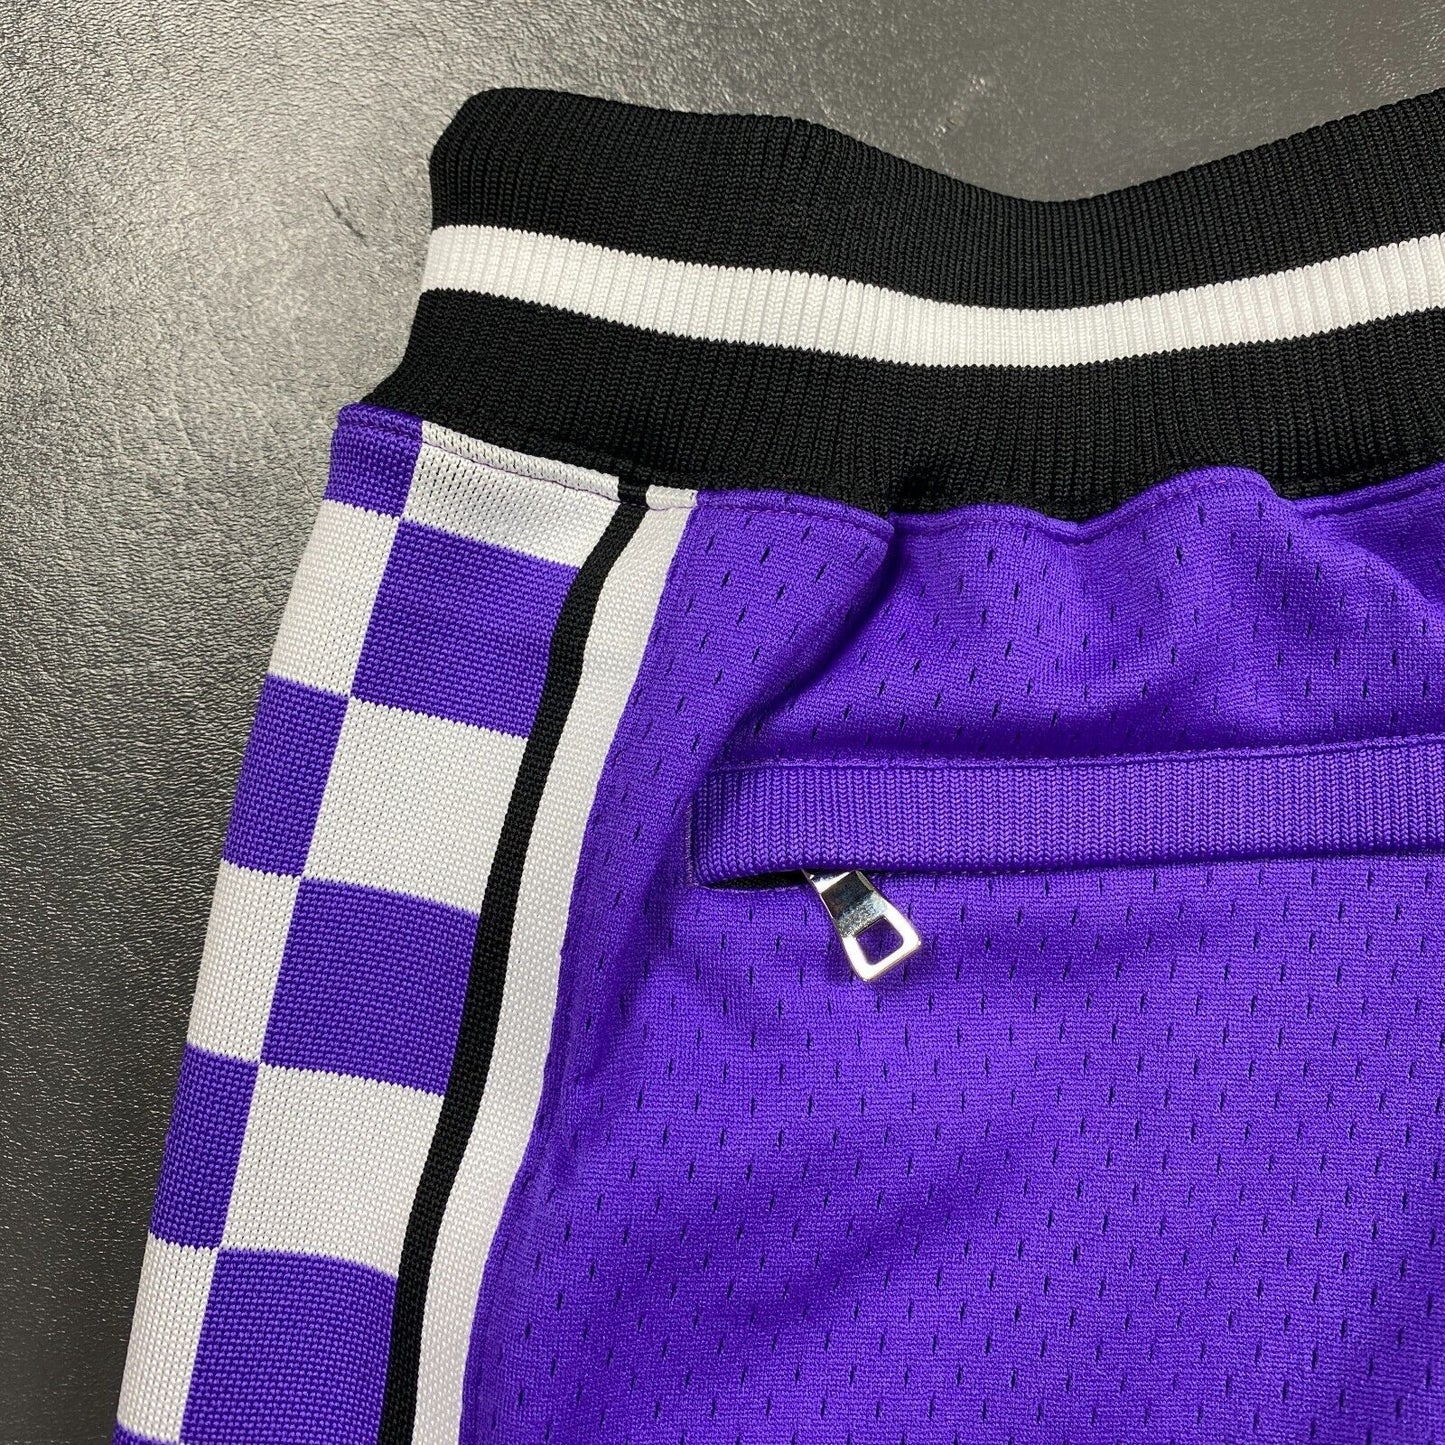 100% Authentic Just Don 94 95 Sacramento Kings Mitchell Ness Shorts Size XL Mens